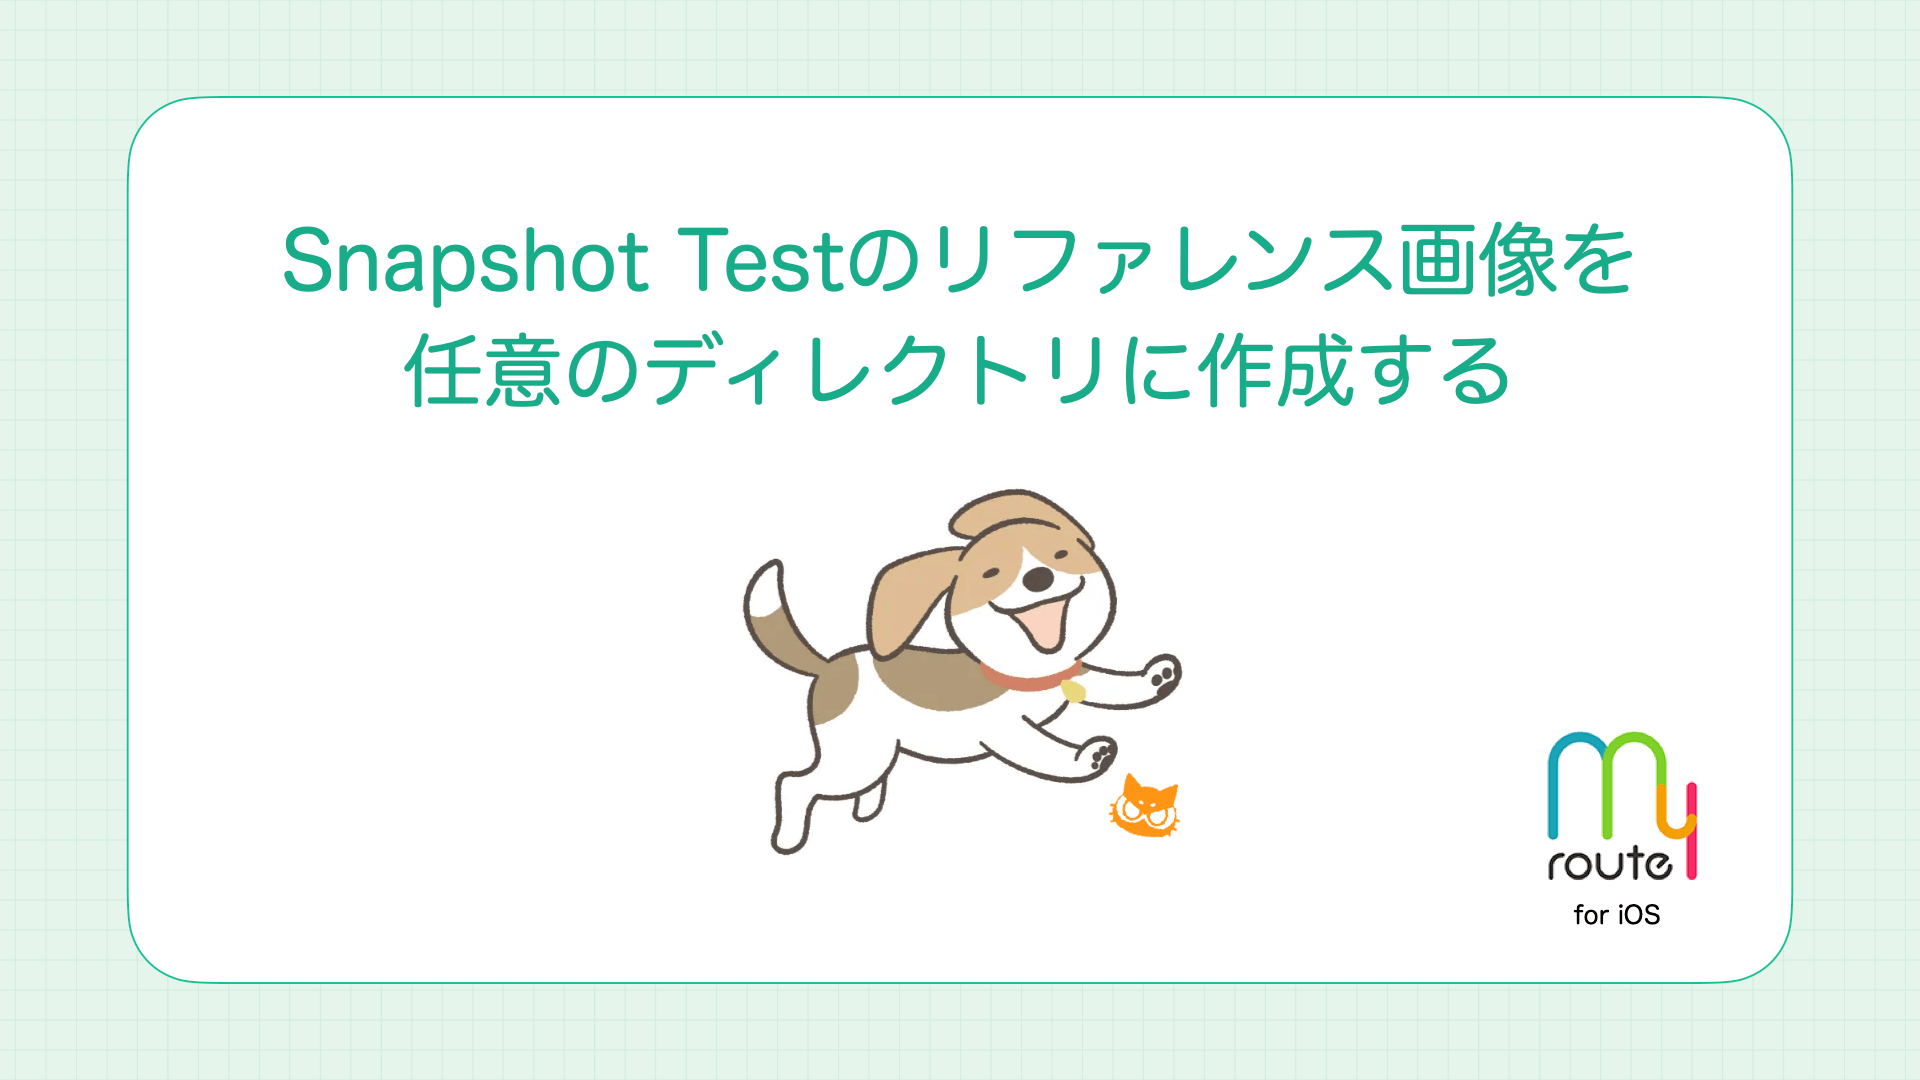 Cover Image for [iOS] Snapshot Test のリファレンス画像を任意のディレクトリに作成する